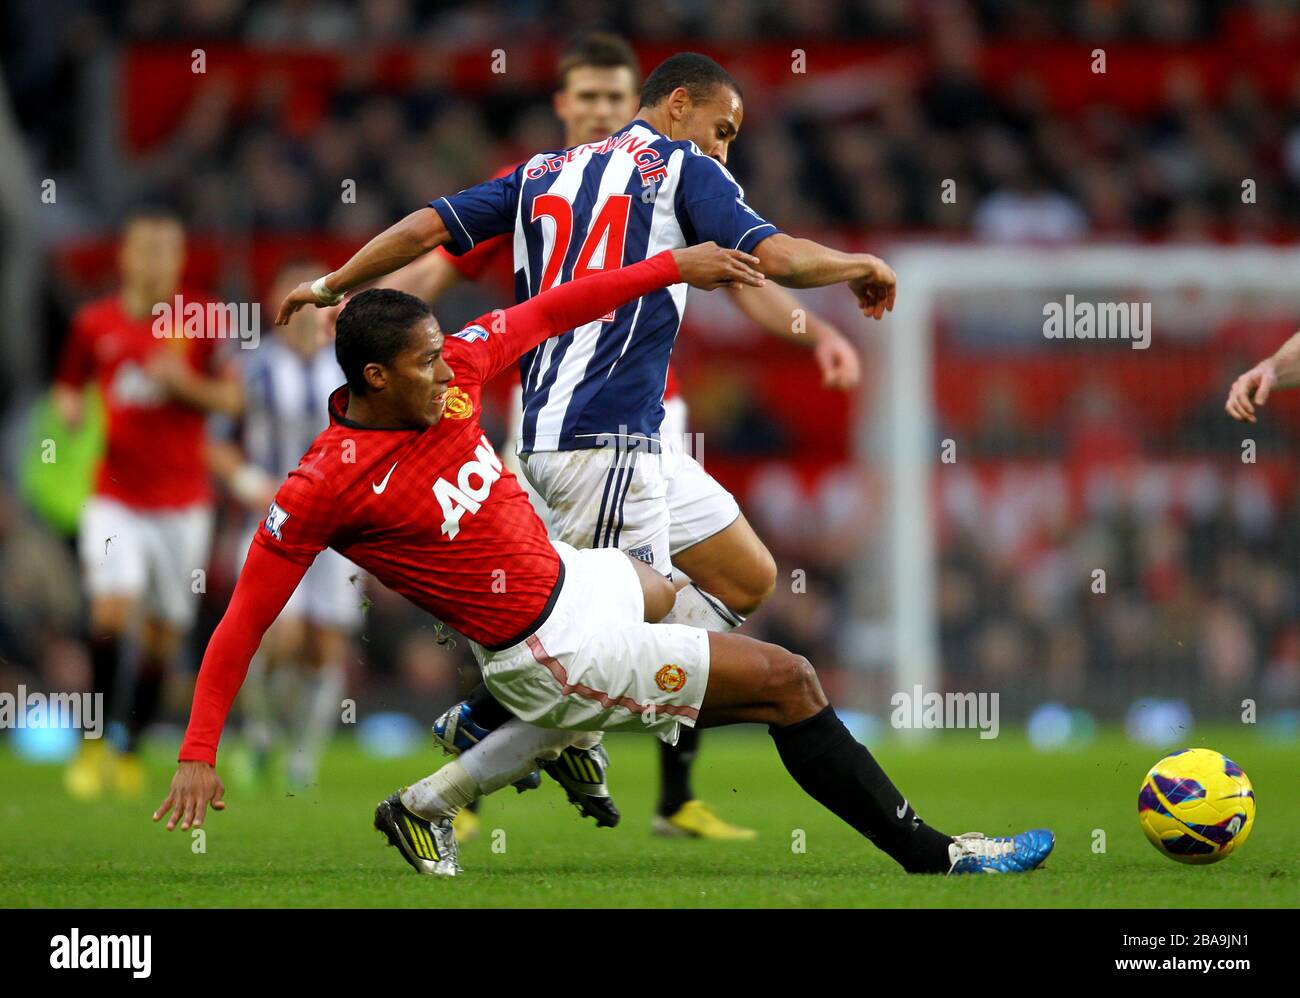 Manchester United's Antonio Valencia (left) and West Bromwich Albion's Peter Odemwingie in action Stock Photo